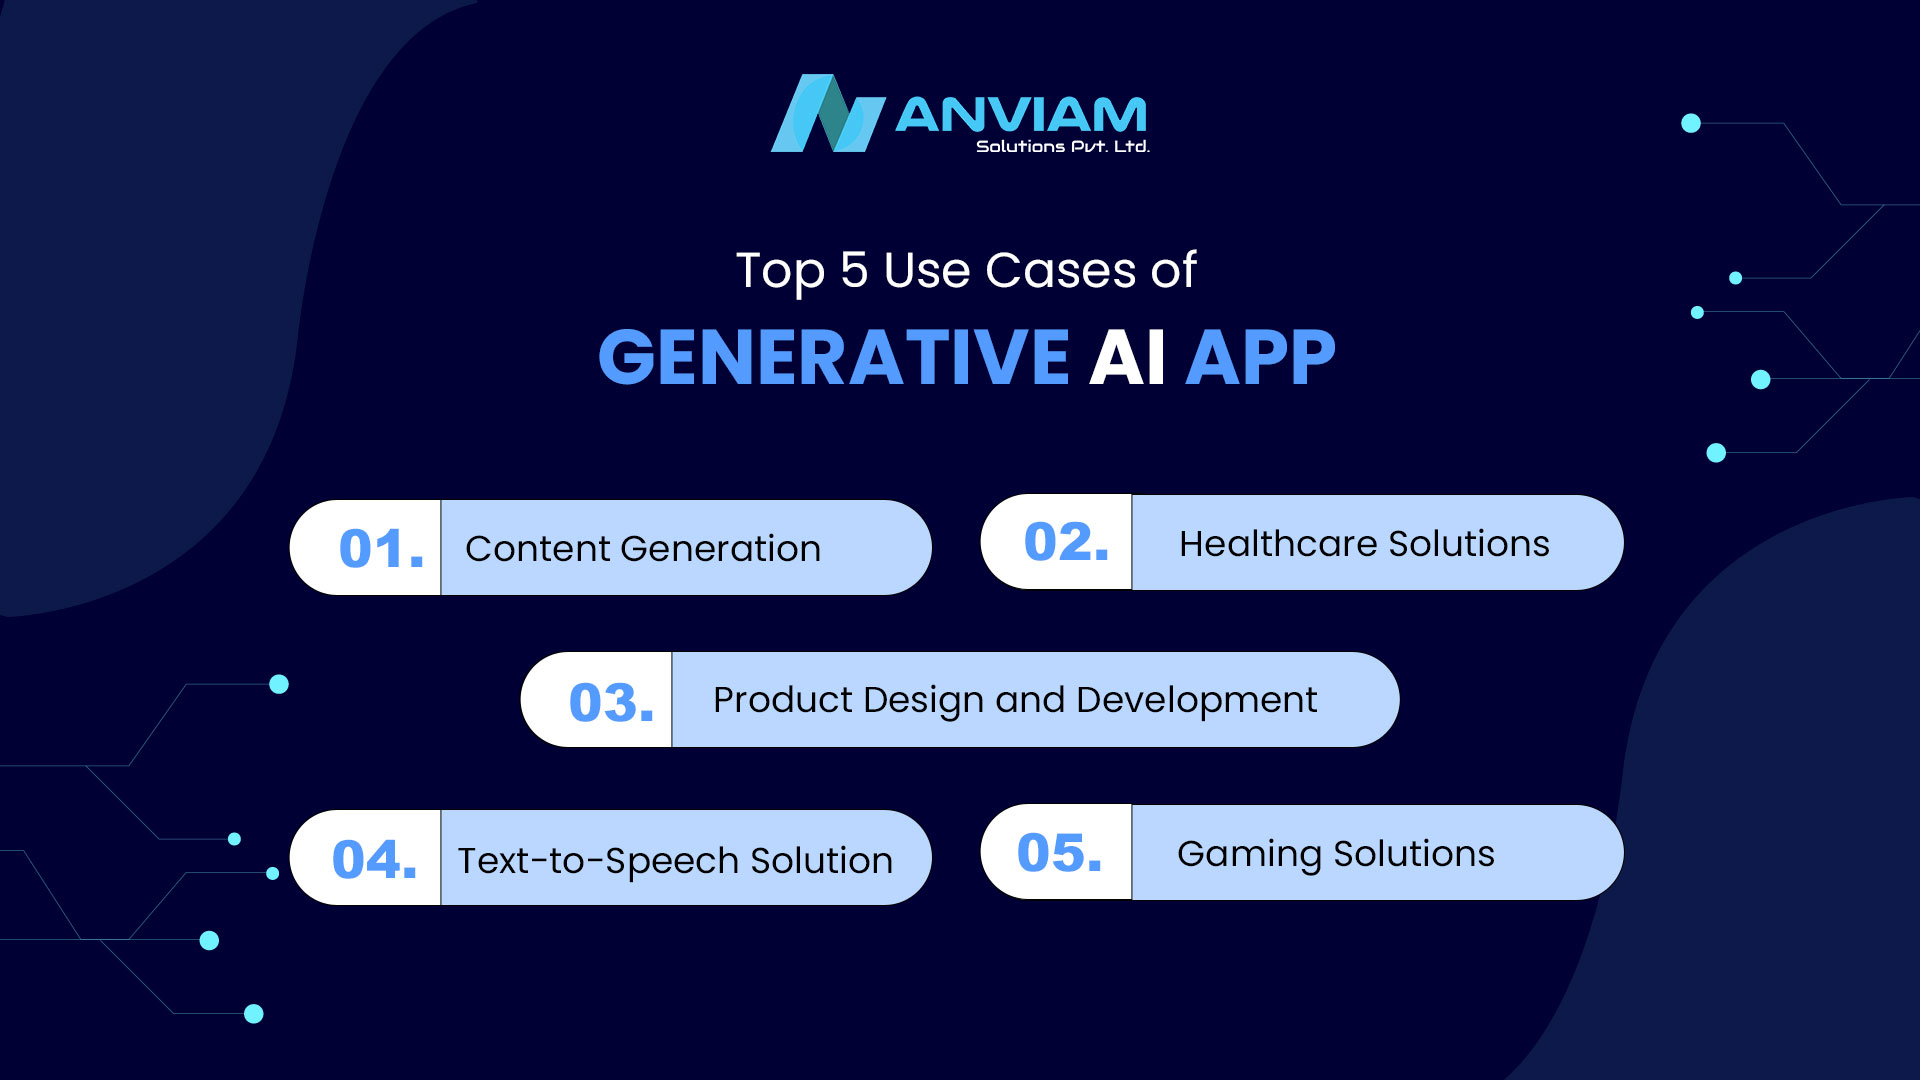  Top 5 Use Cases of Generative AI App 